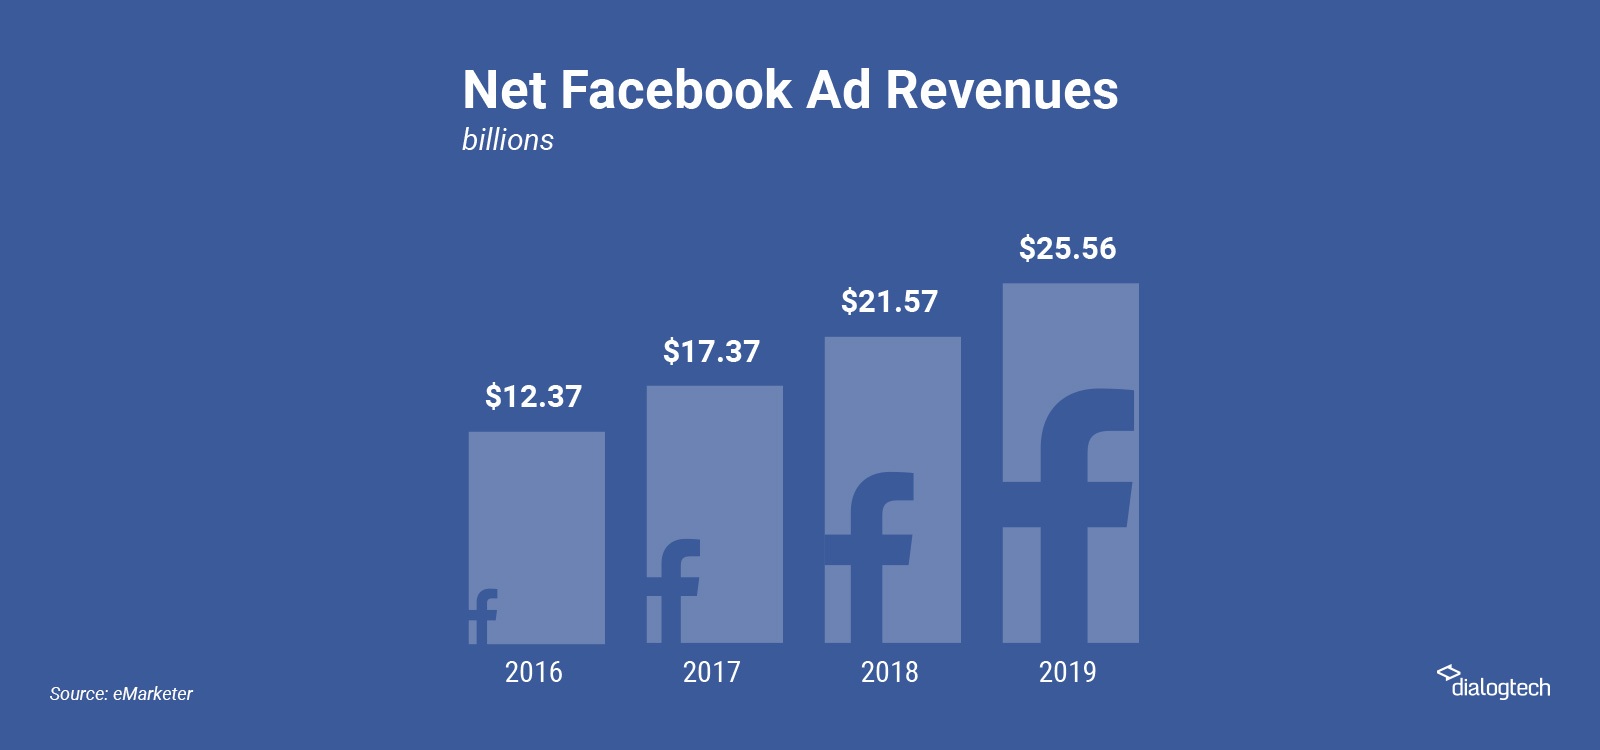 Companies are increasing their Facebook ad spend